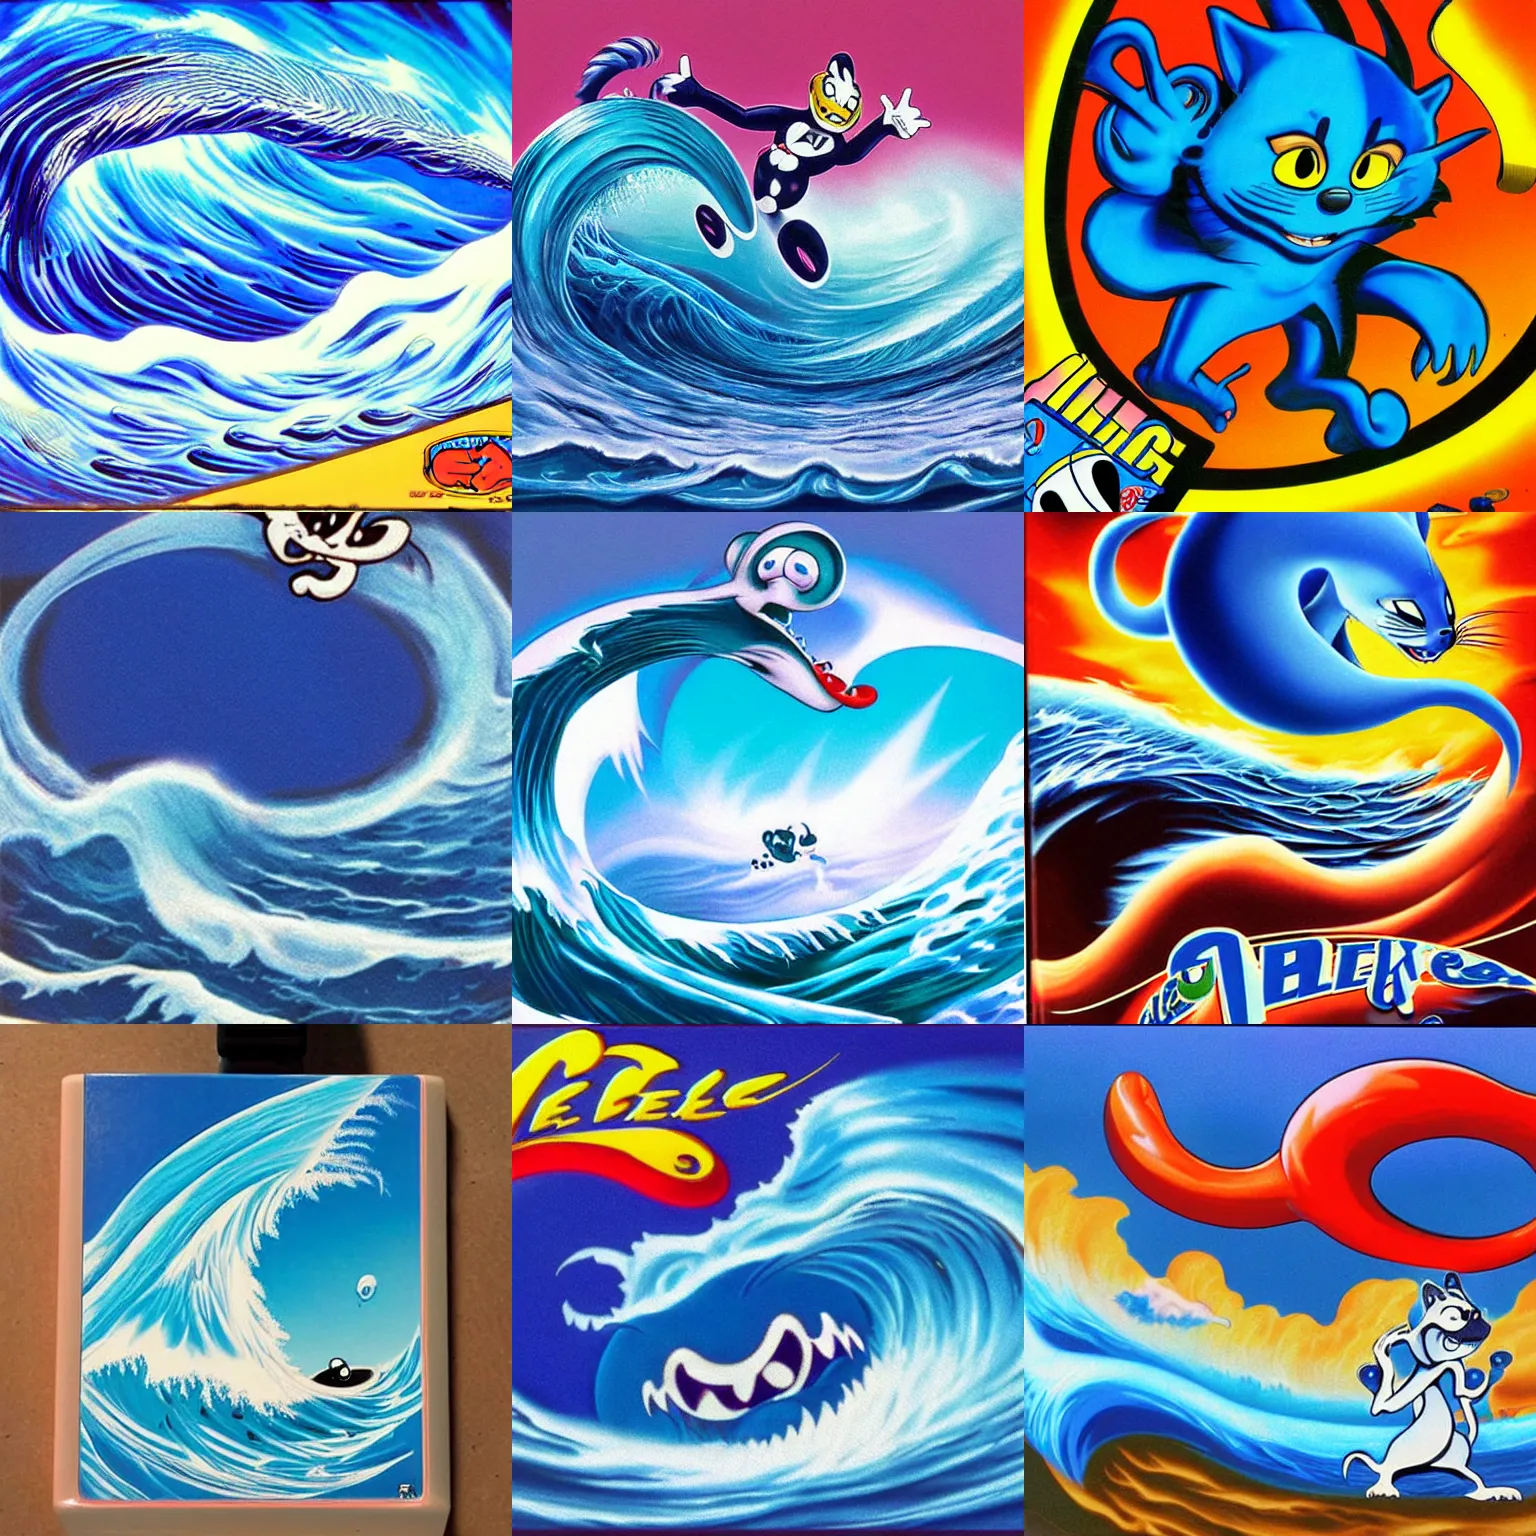 Prompt: professional, high quality airbrush art of a blue cresting ocean wave in the shape of Felix the Cat, 1990s 1992 Sega Genesis box art